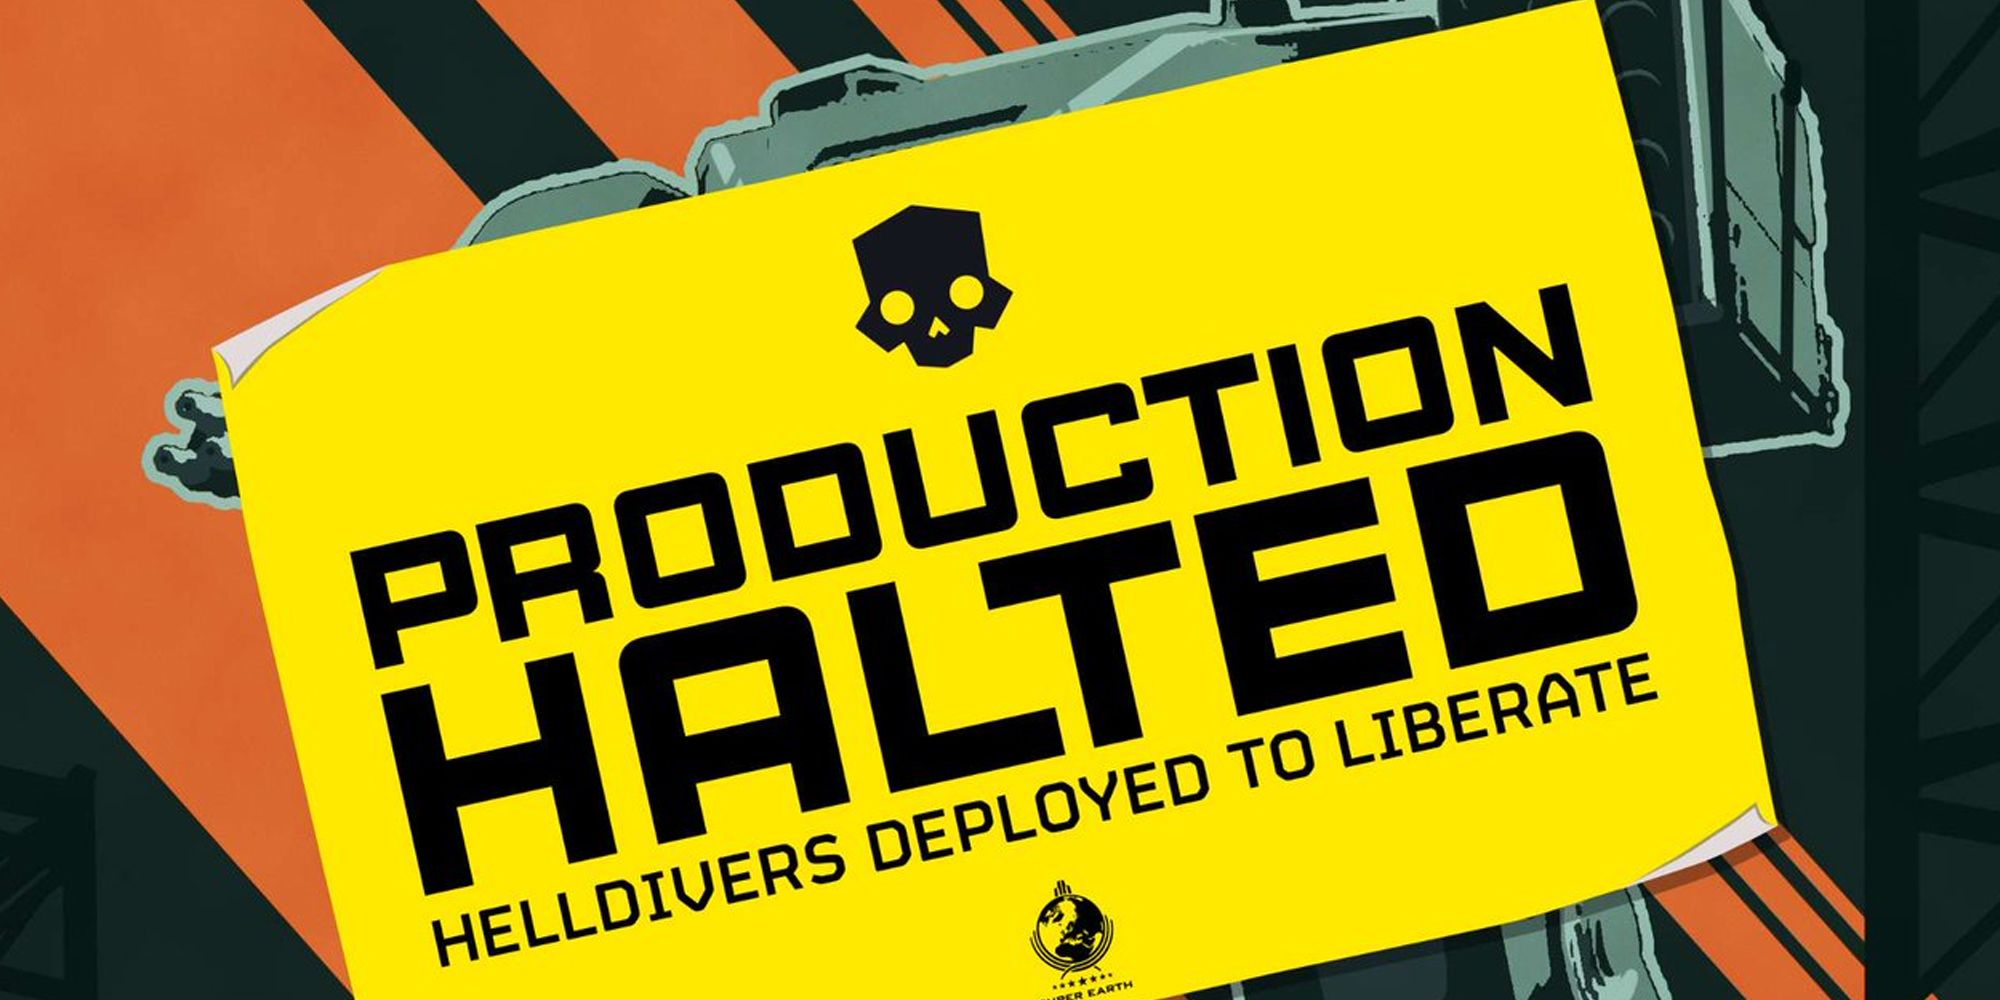 Helldivers 2 mech poster with Production Halted on top